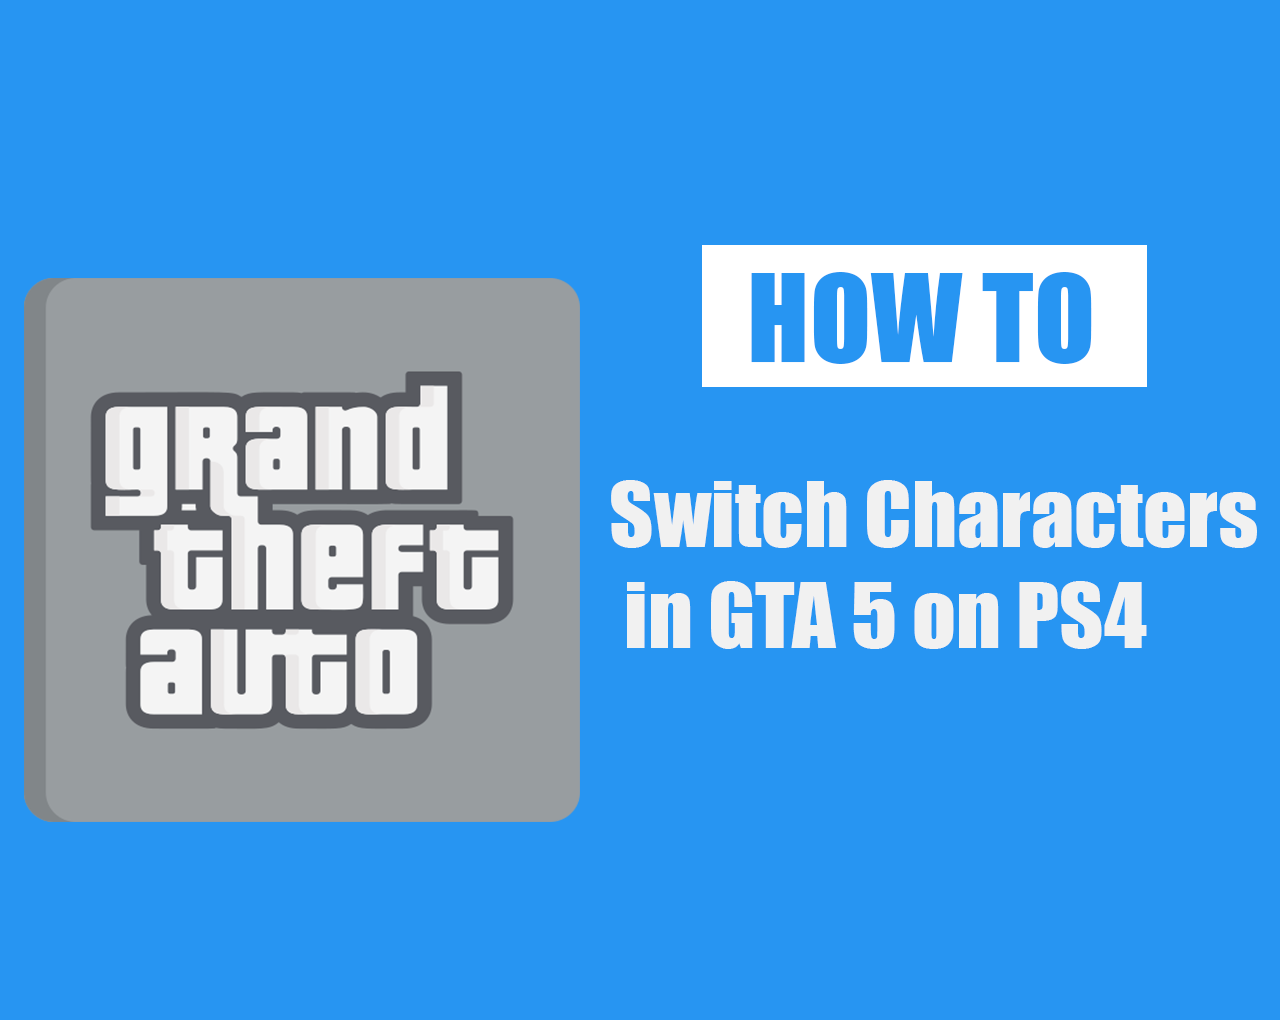 How to Switch Characters in GTA 5 on PS4